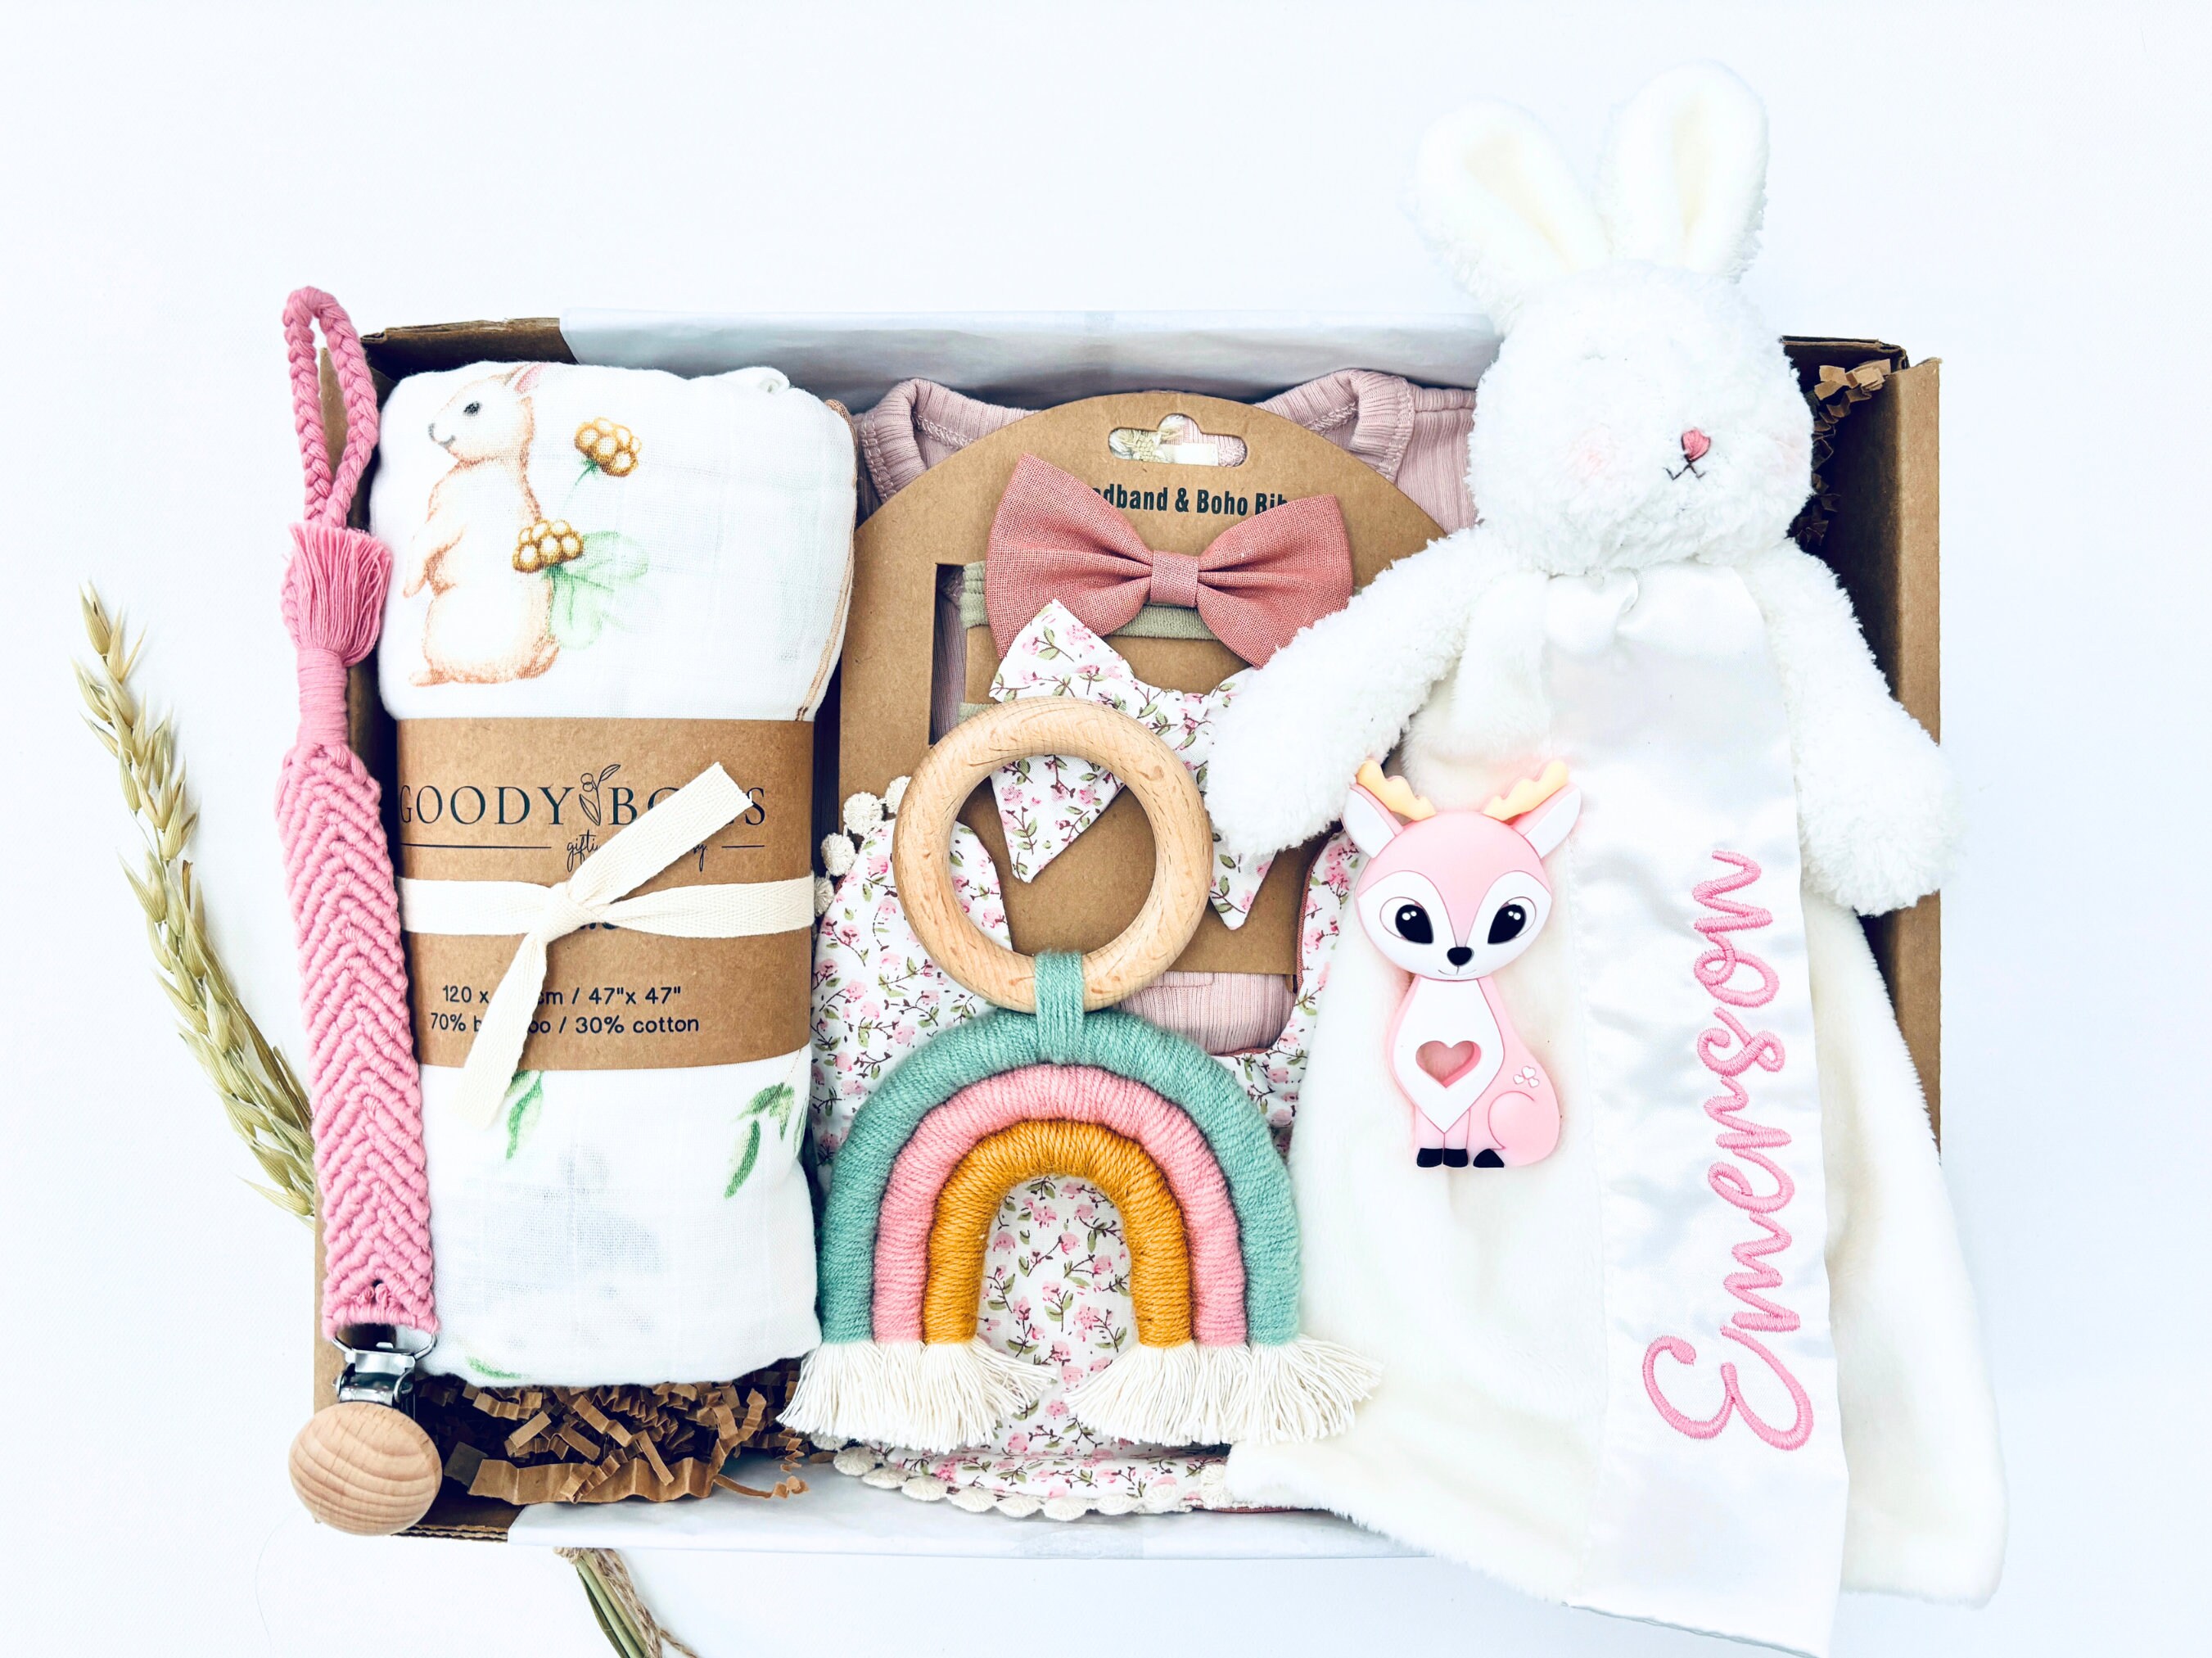 4 Unique Creative Baby Shower Gift Ideas For Girls – Little Girl's Pearls